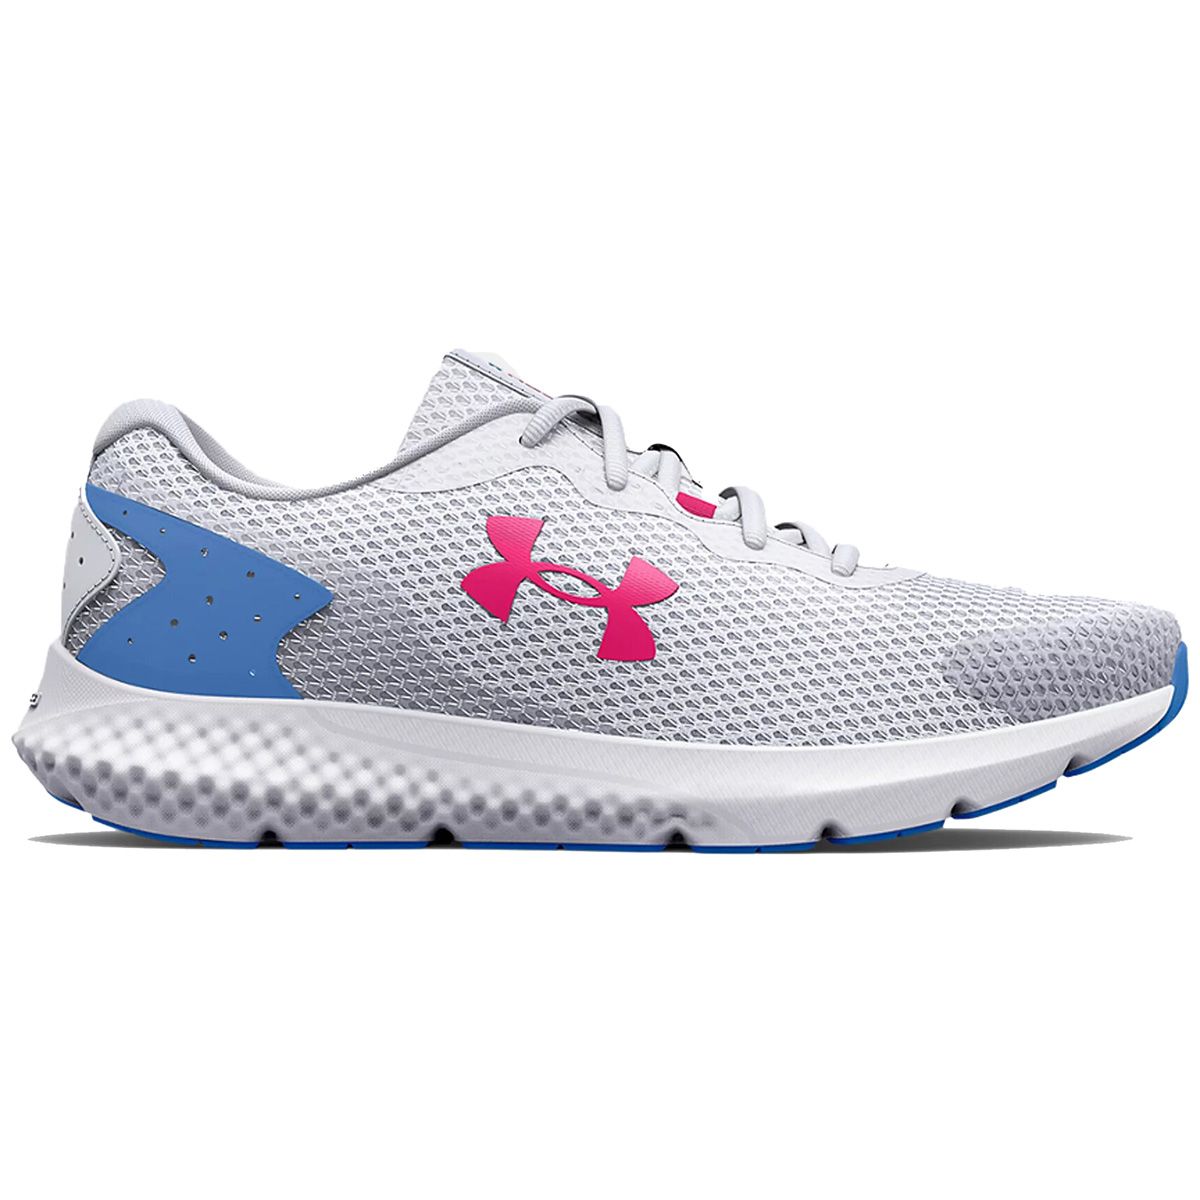 Under Armour Charged Bandit 3 Womens Running Trainer Shoe Pink UK 7 